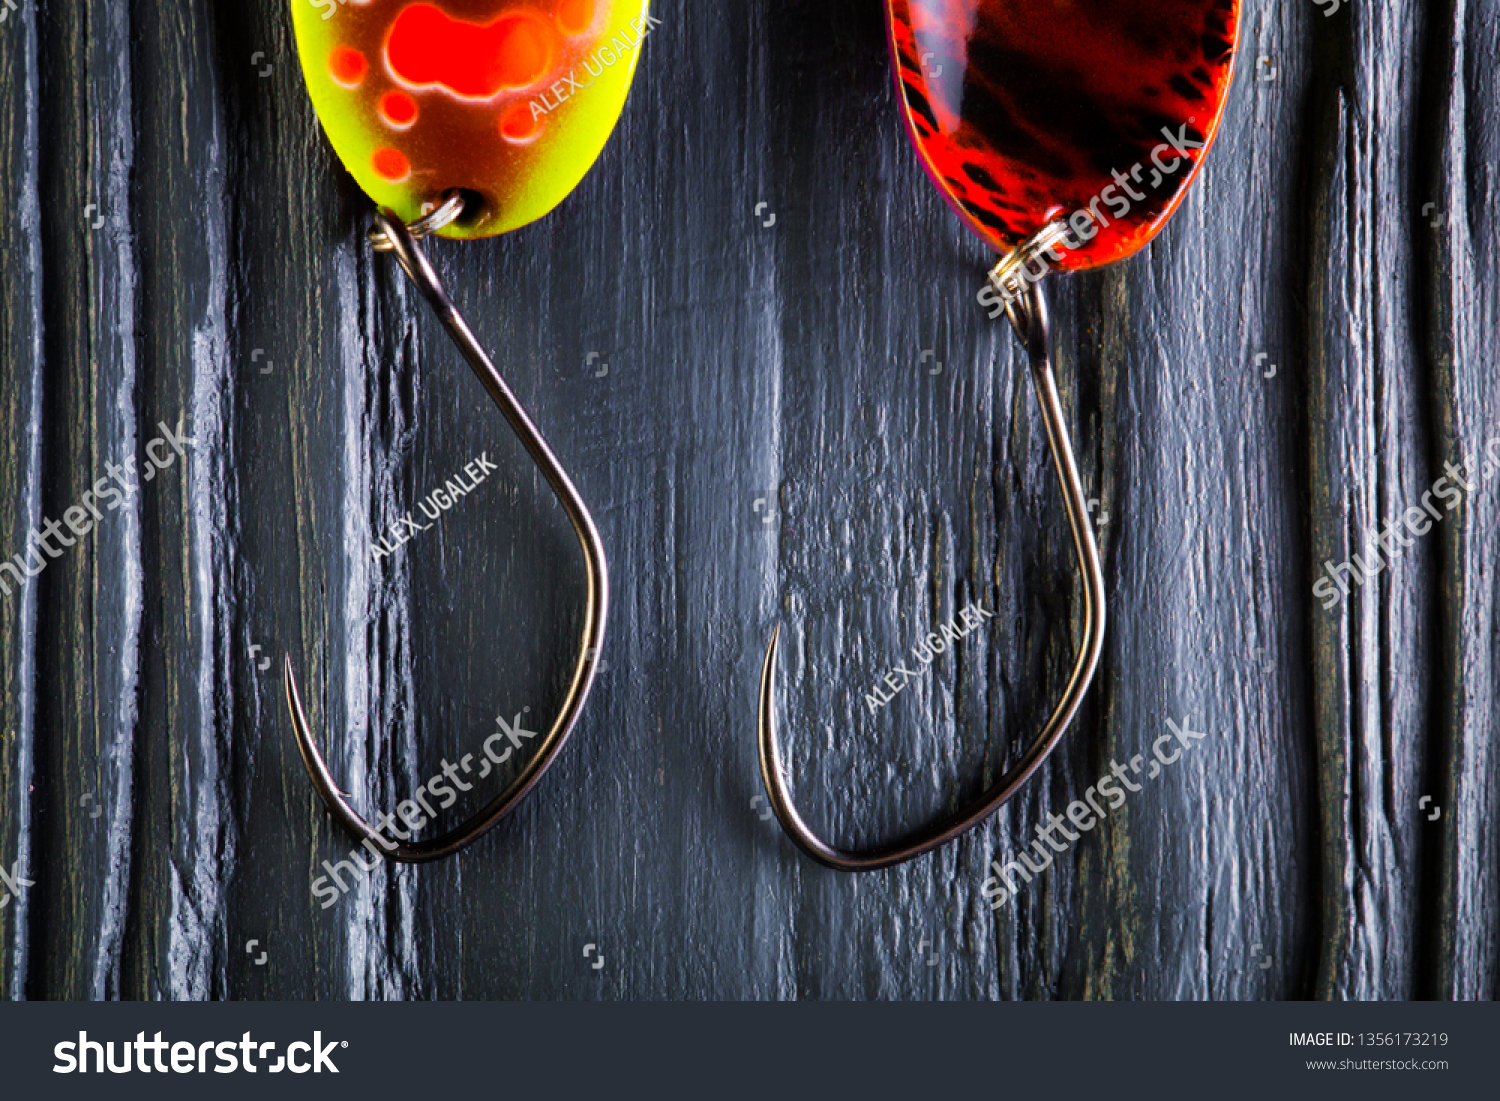 Hooks for trout baits. Spoon baits close-up on black wooden background. Colorful fishing baits. #1356173219